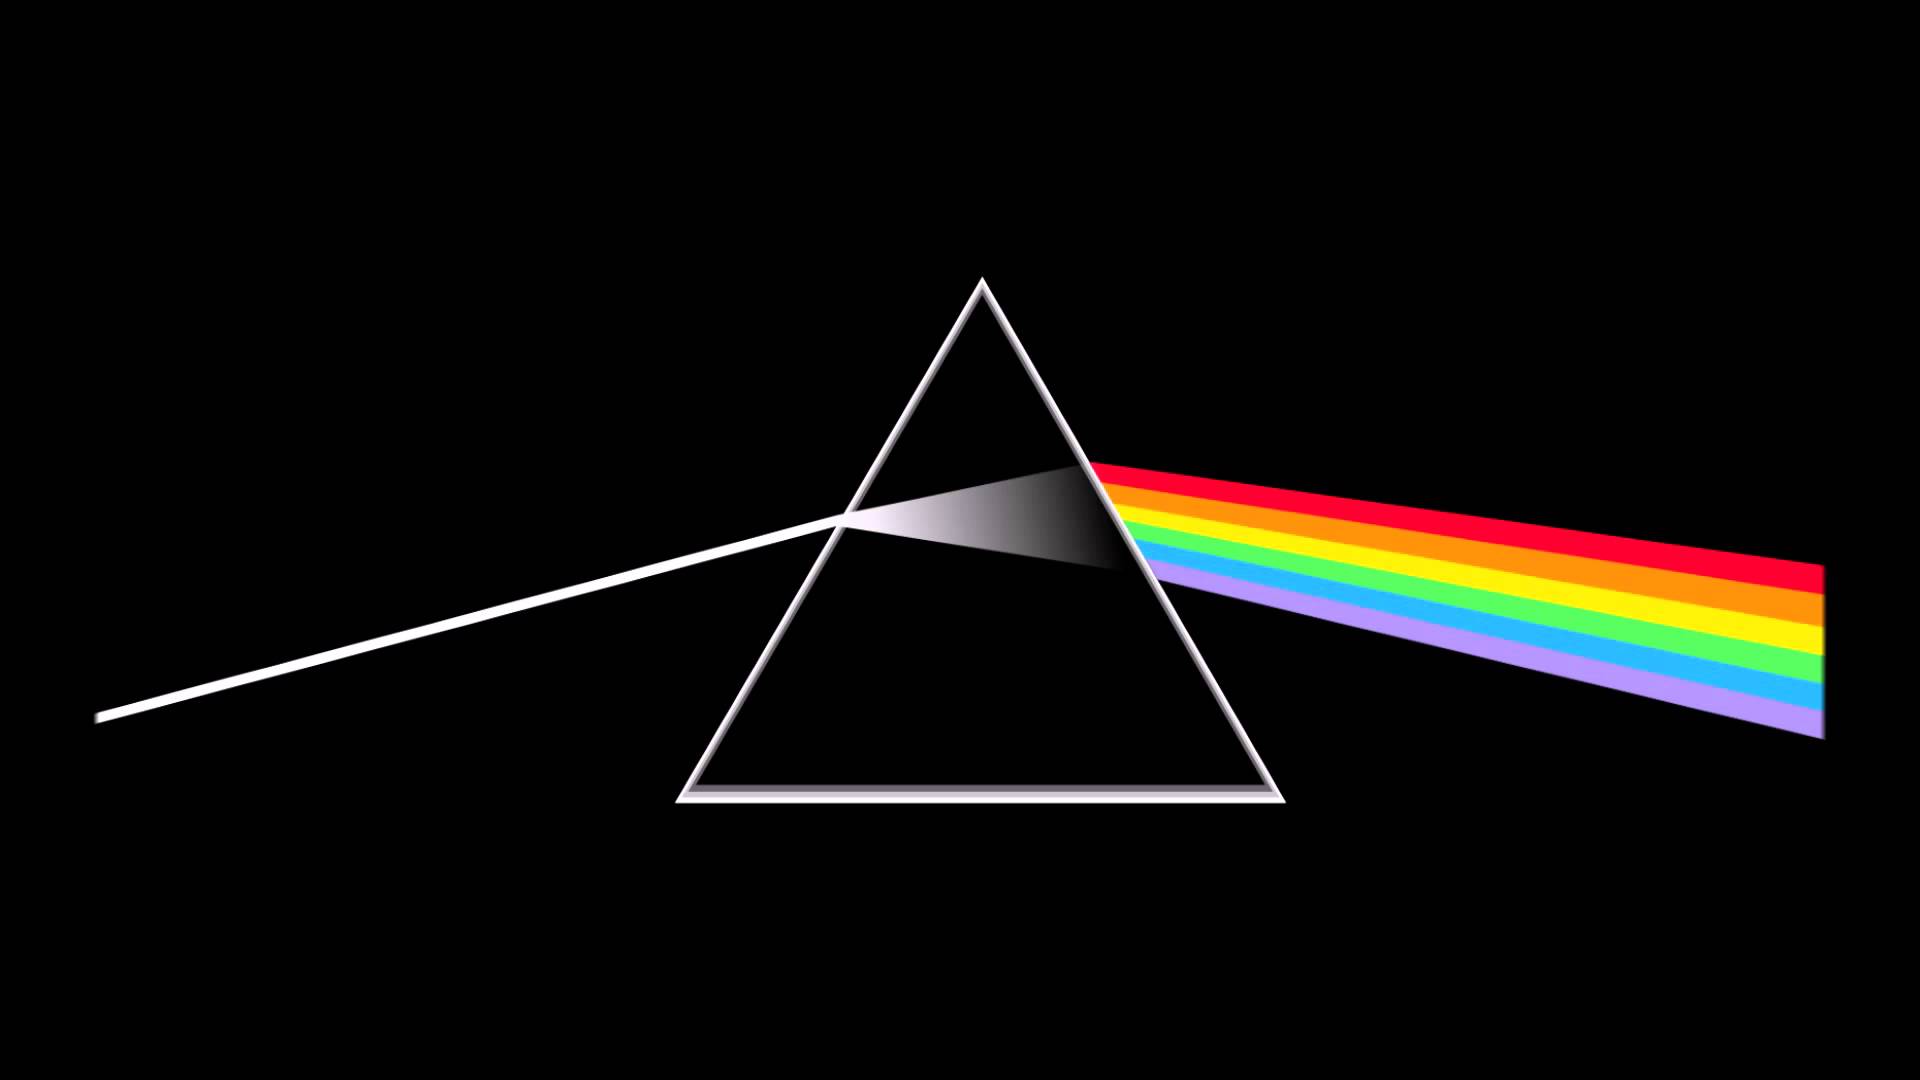 Pink Floyd's Dark Side Of The Moon is elected the best album of all time